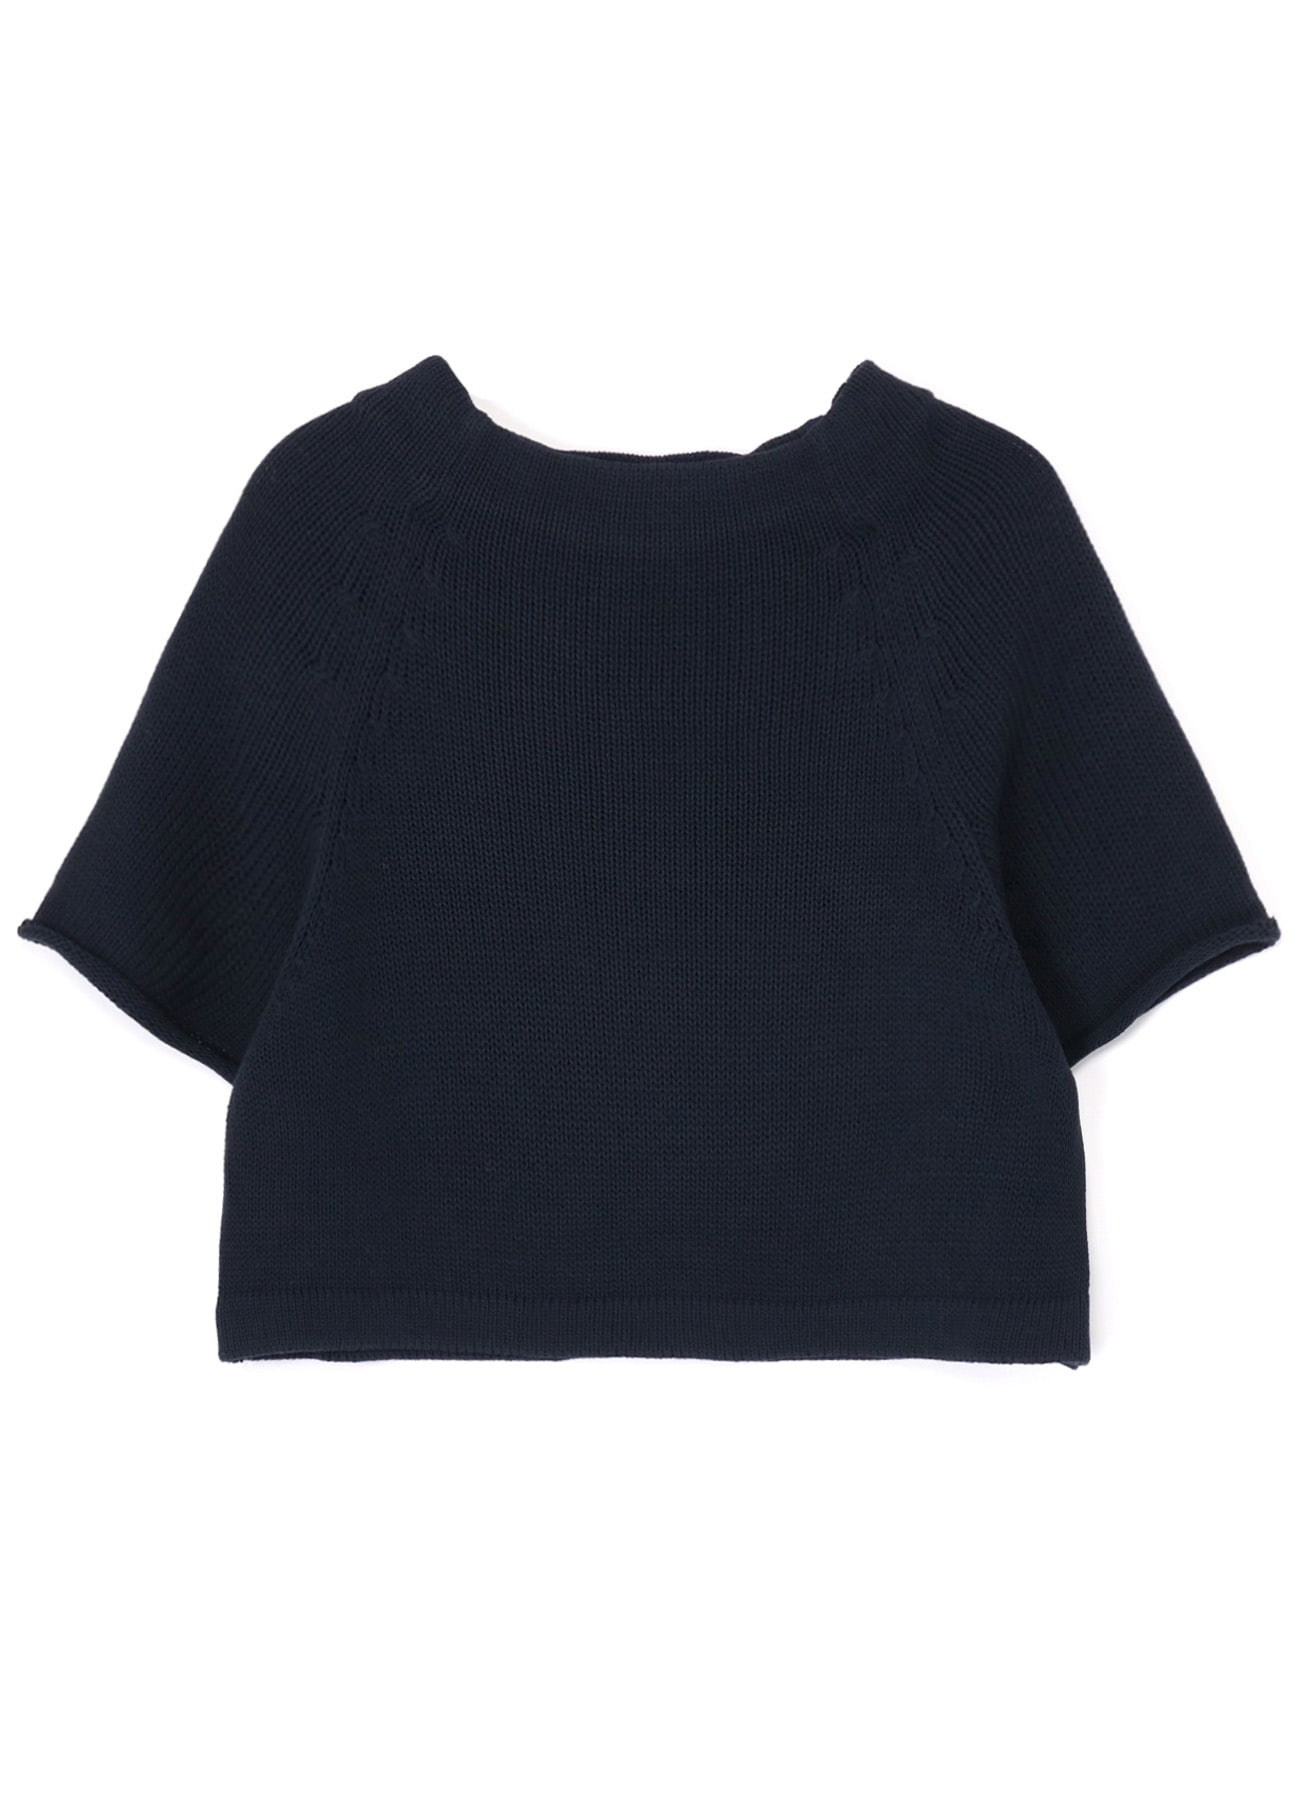 JERSEY CURLED SLEEVE RAGLAN PULLOVER